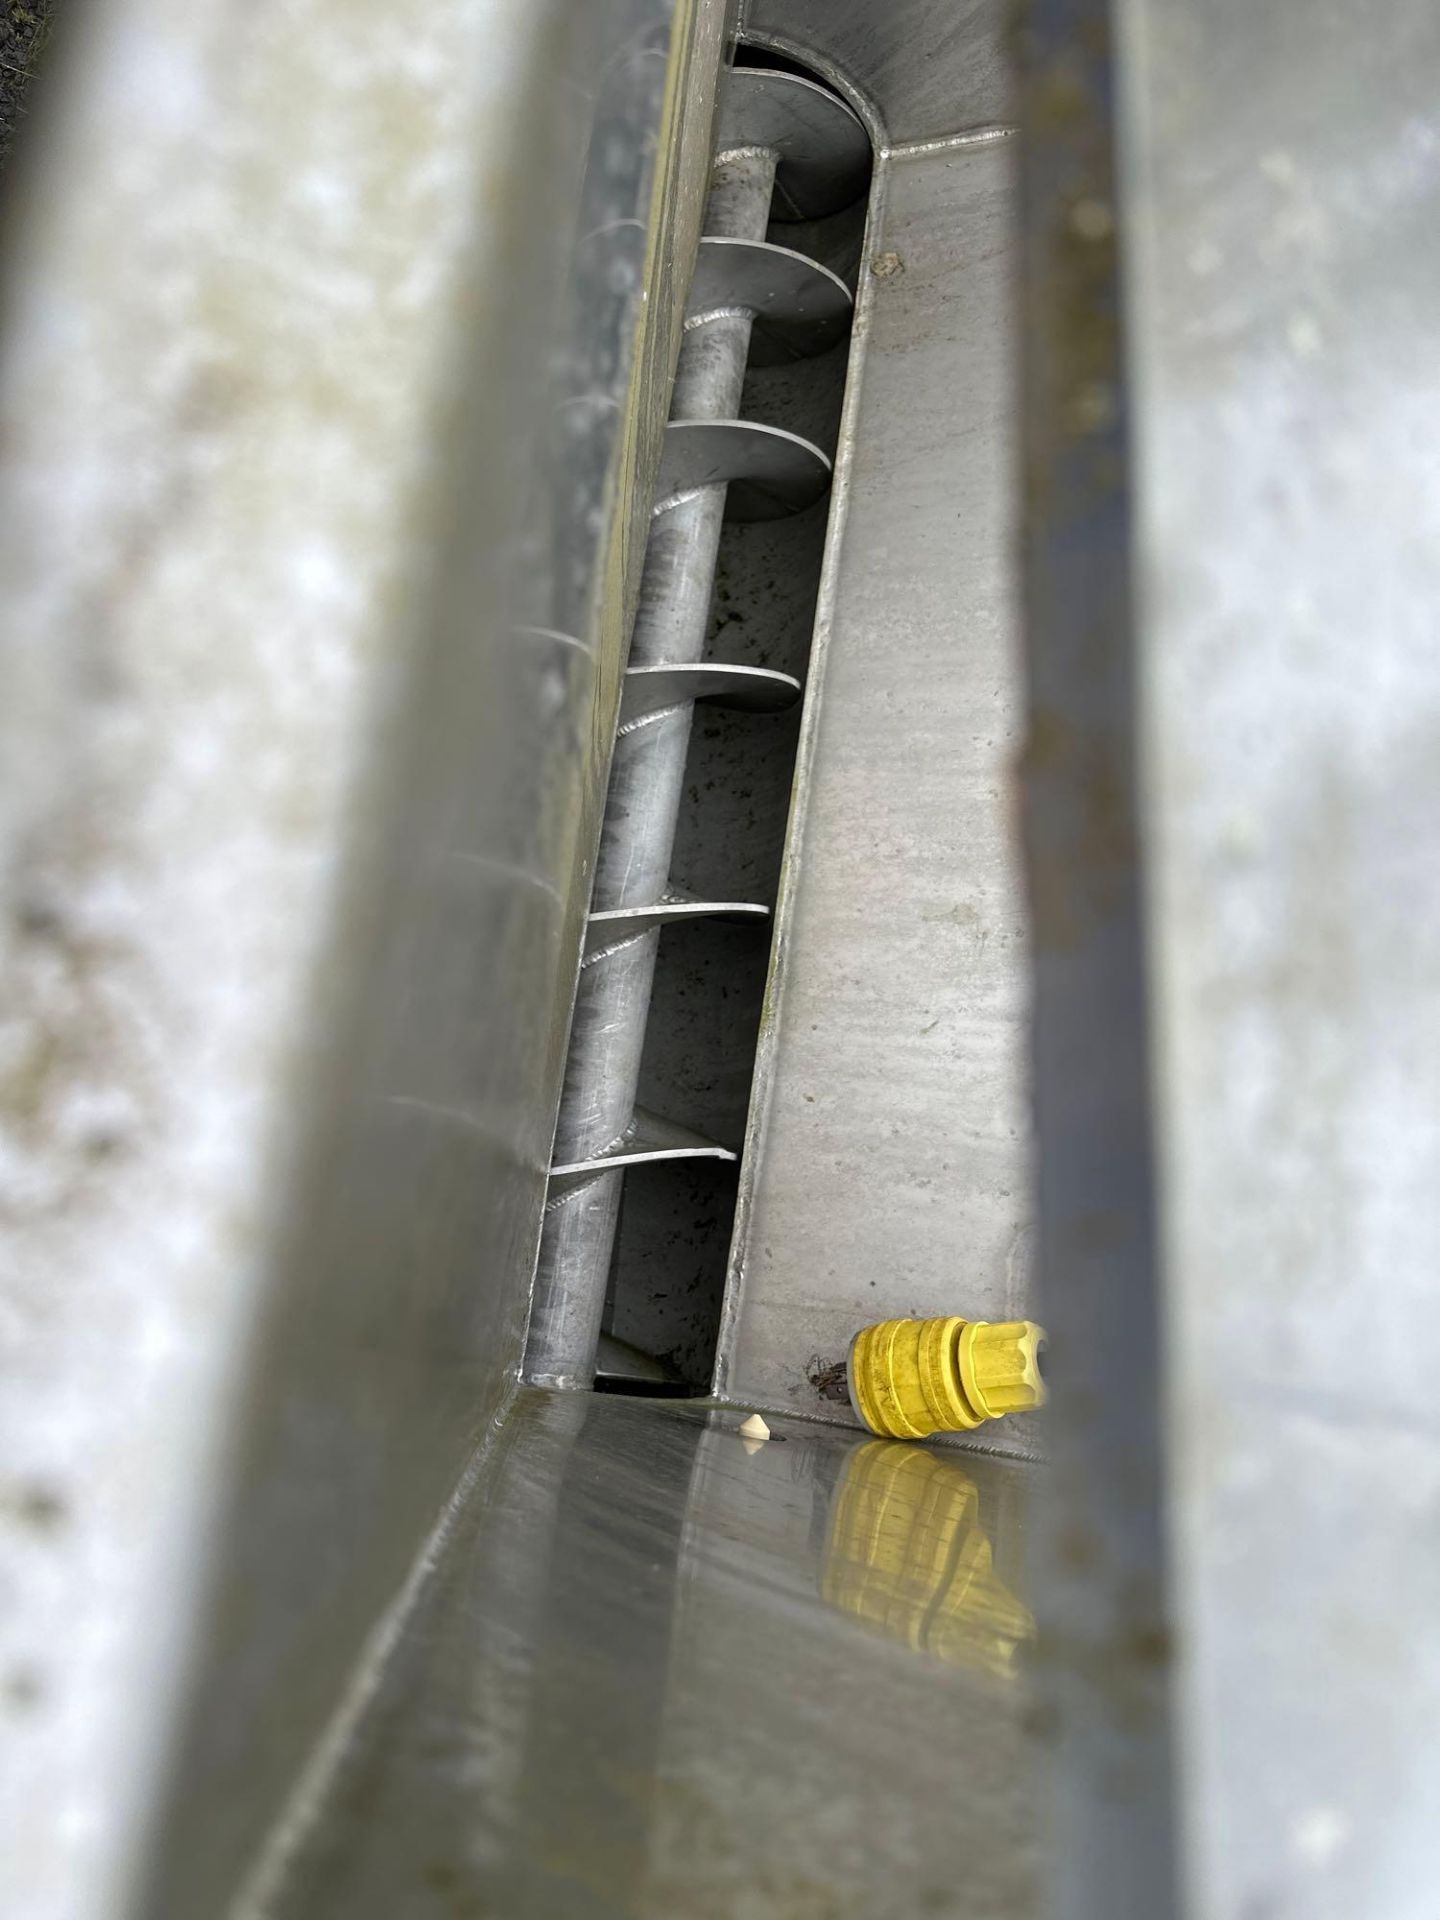 STAINLESS STEEL AUGER SCREW FEEDER WITH HOPPER - Image 3 of 5